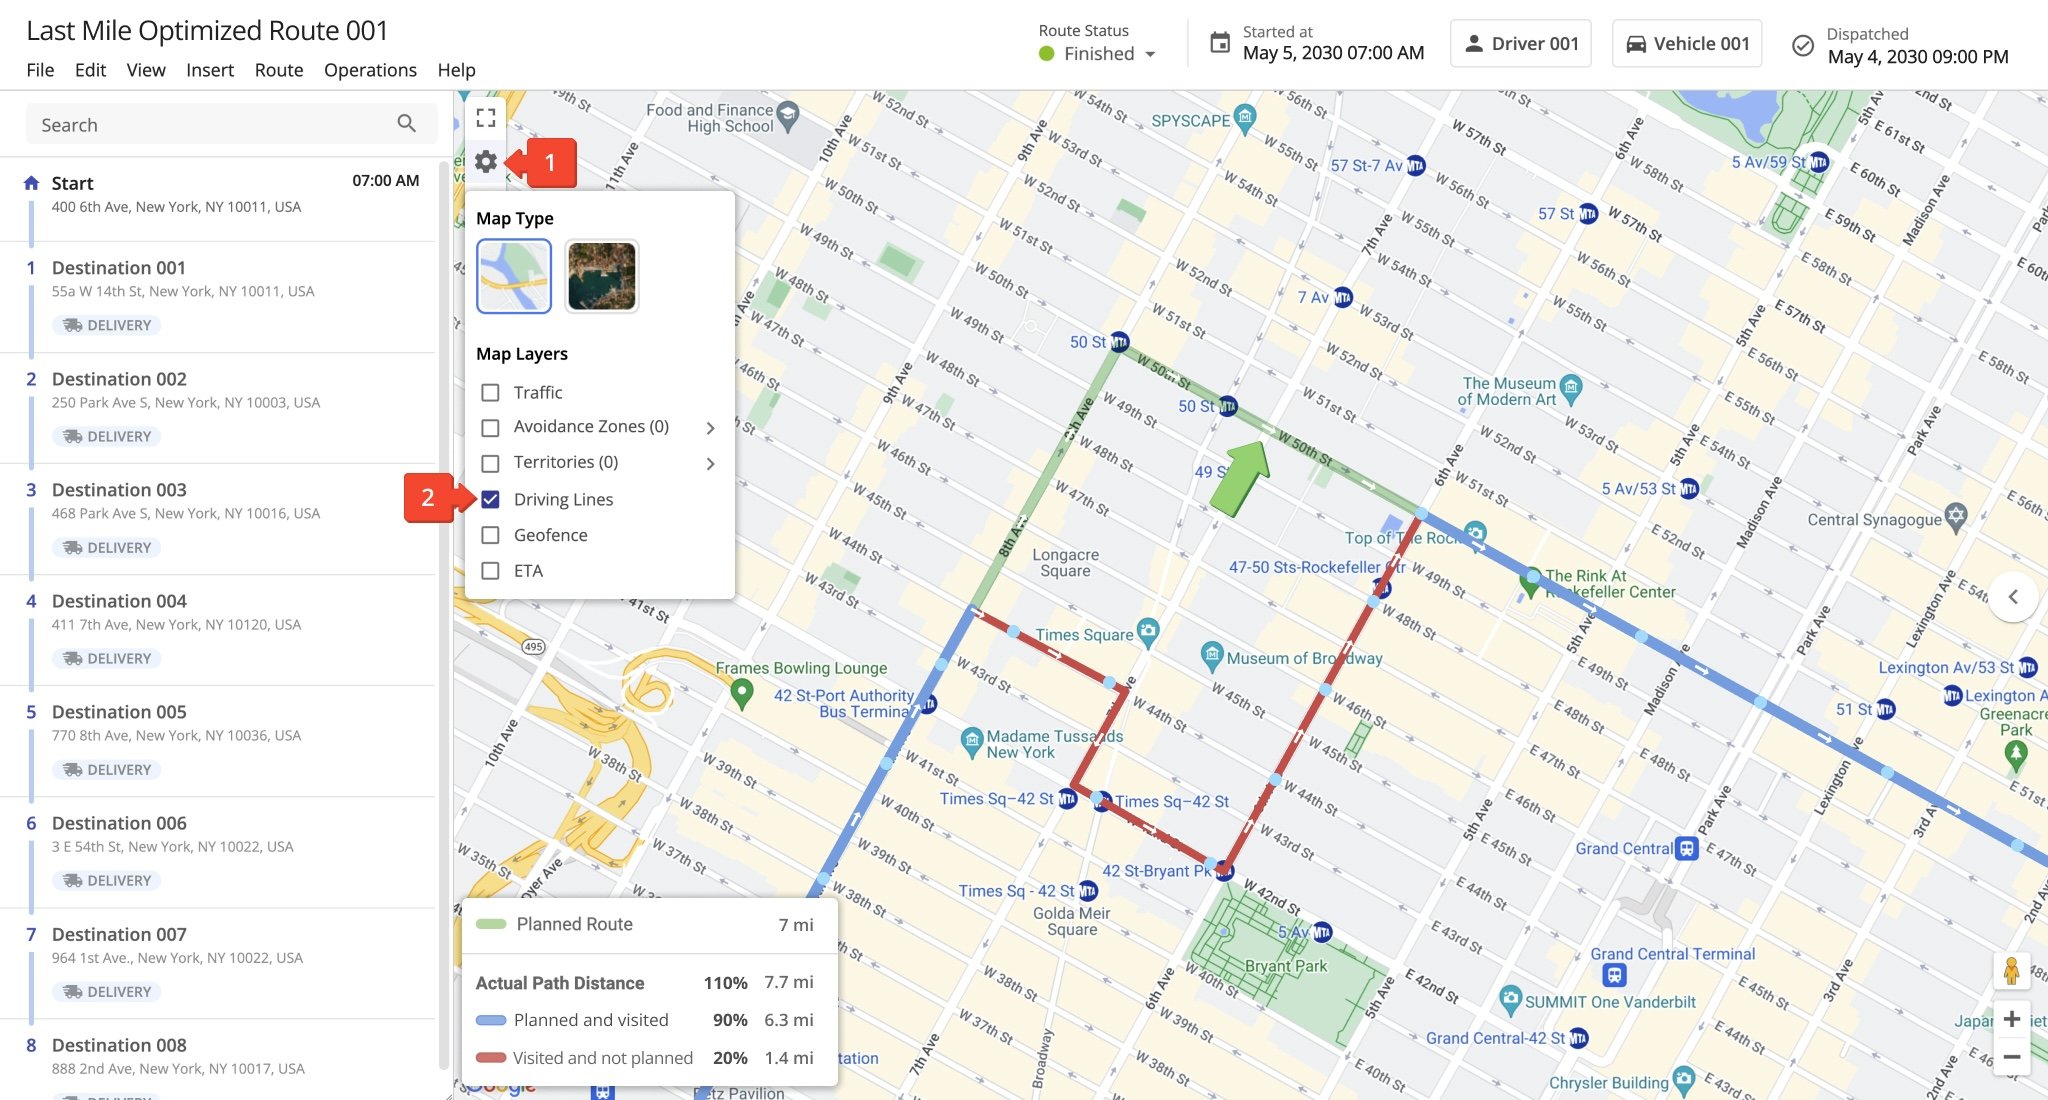 To ensure the respective route's planned travel path is shown, click the Map Layers Icon. Then, check the Driving Lines box to display the planned and optimized route path.